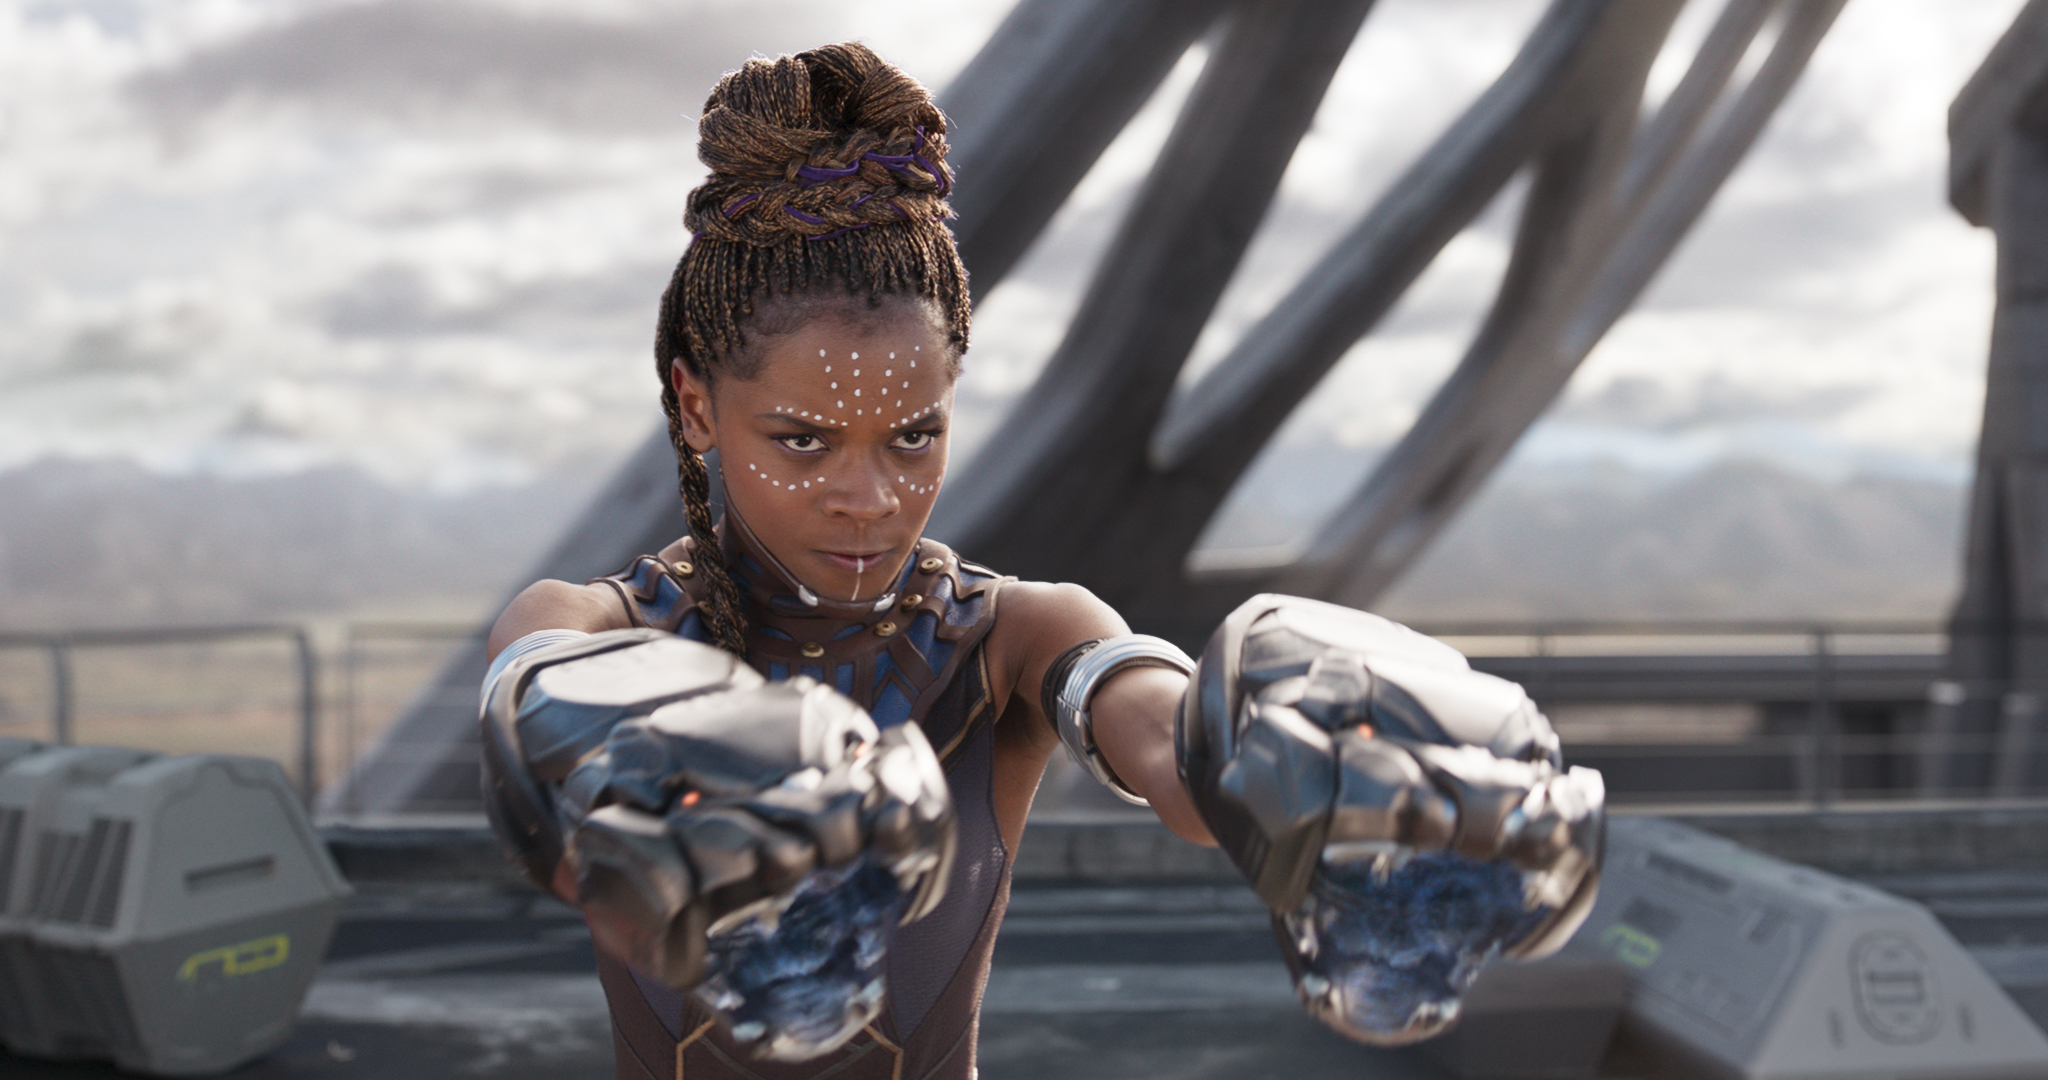 PHOTO: Lettia Wright in the movie "Black Panther."